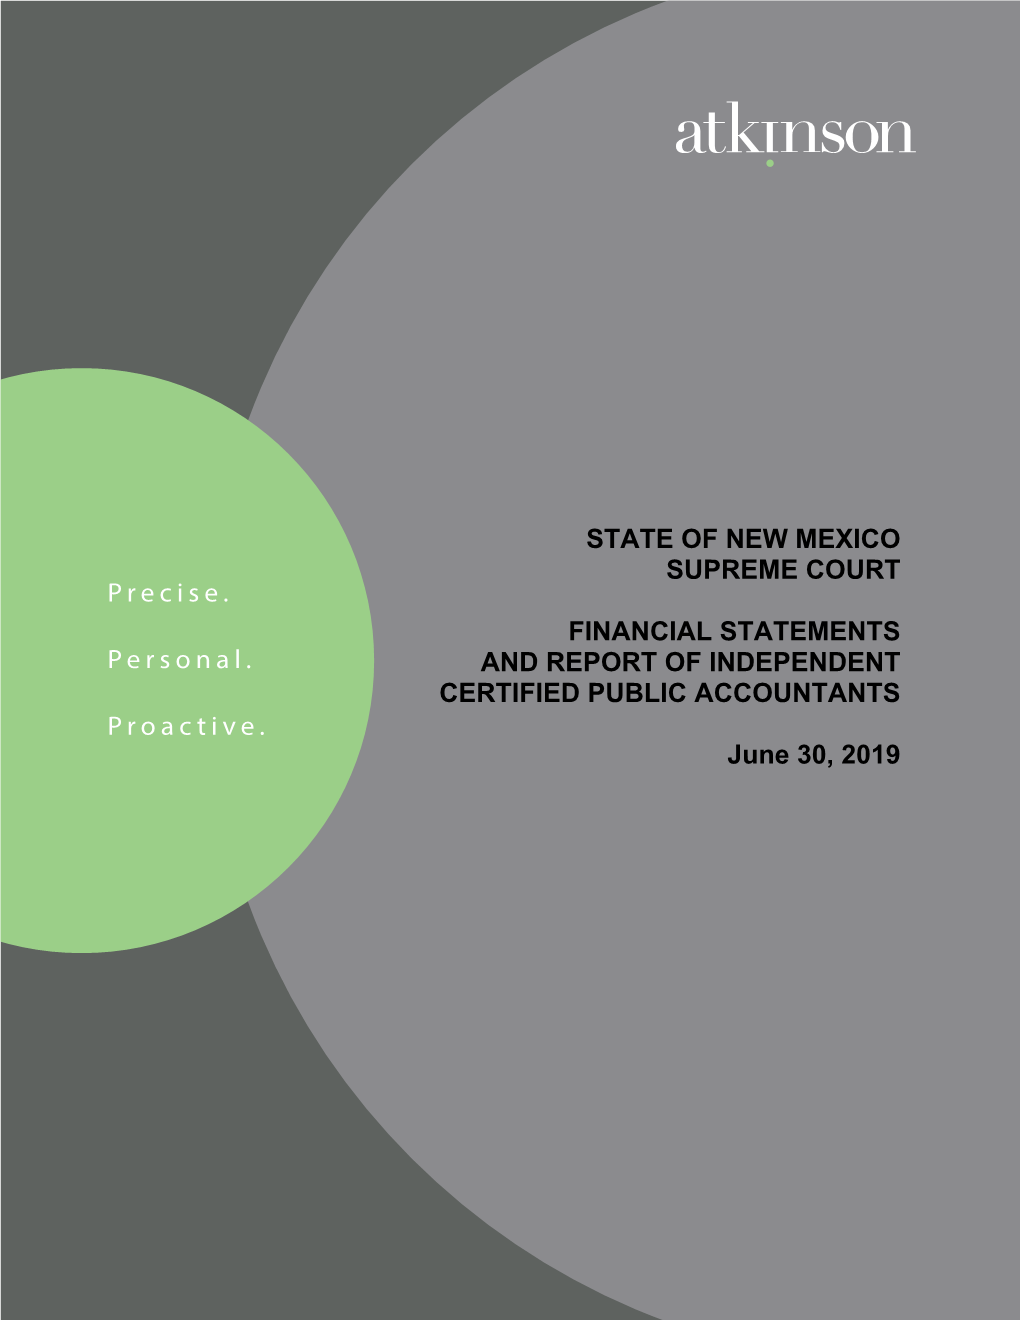 State of New Mexico Supreme Court Financial Statements